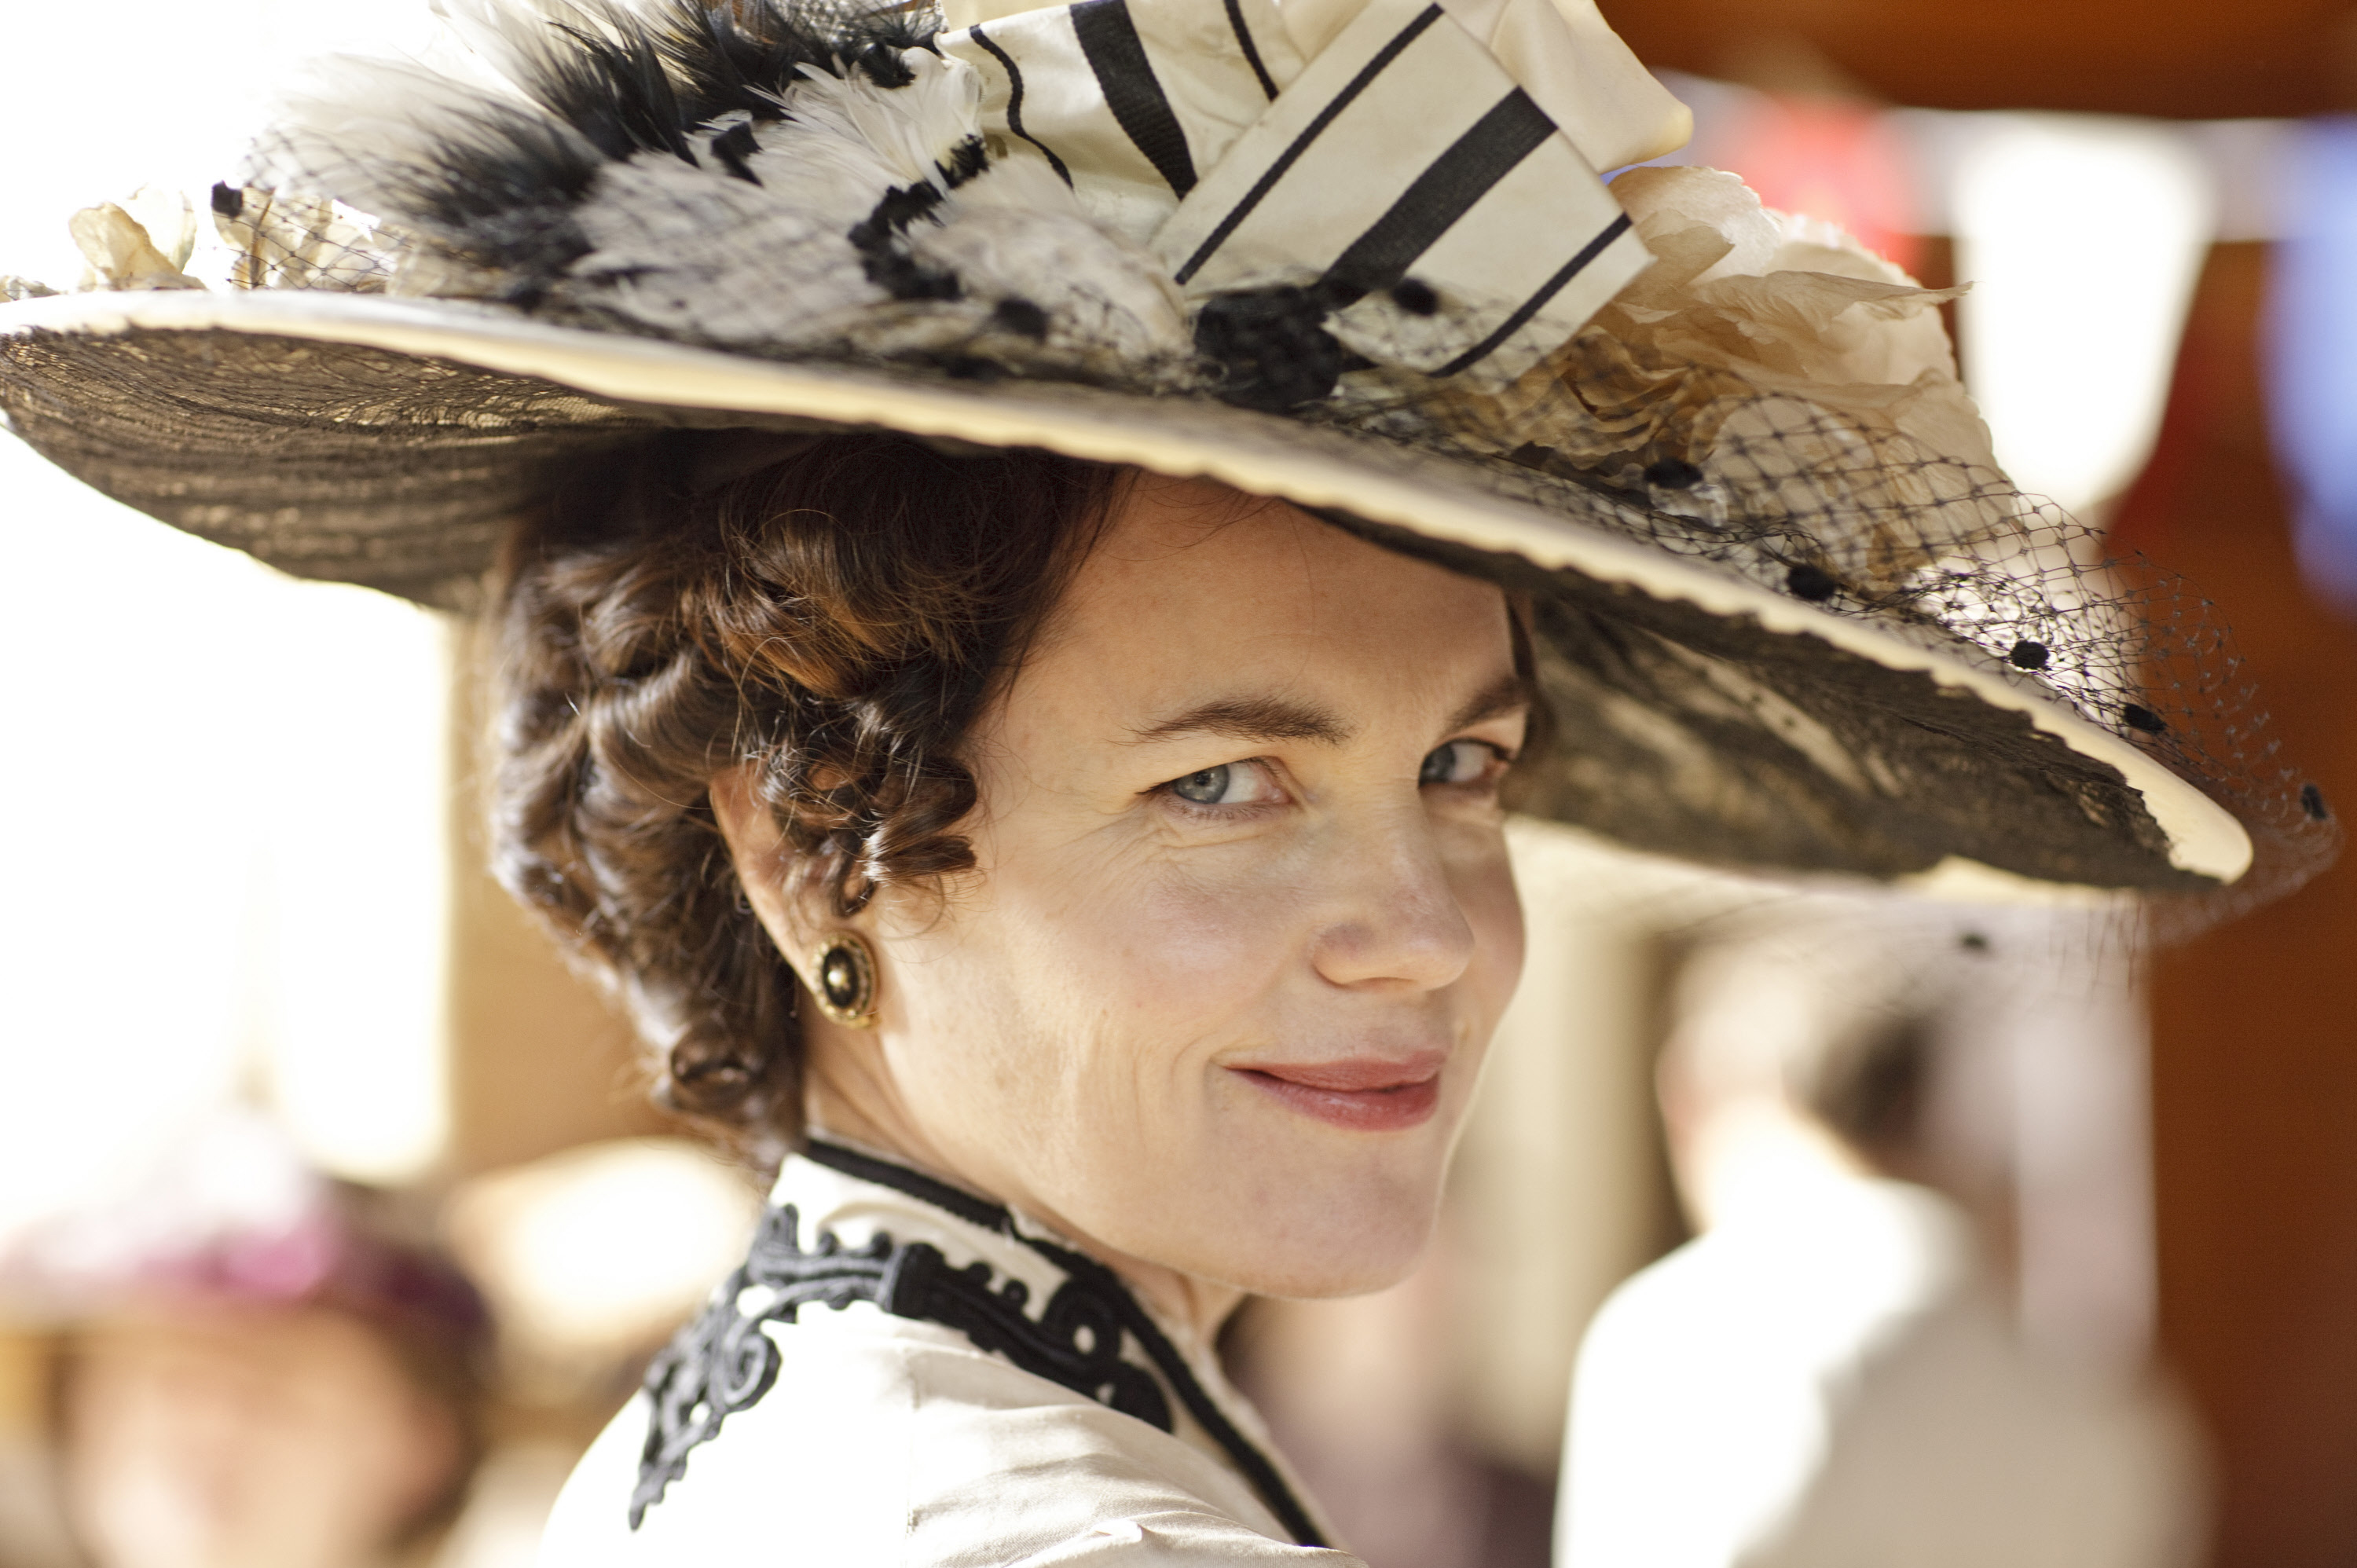 <p>Here's a closer look at that epic hat Elizabeth McGovern's Cora Crawley, Countess of Grantham wore at the garden party on season 1 of "Downton Abbey."</p>